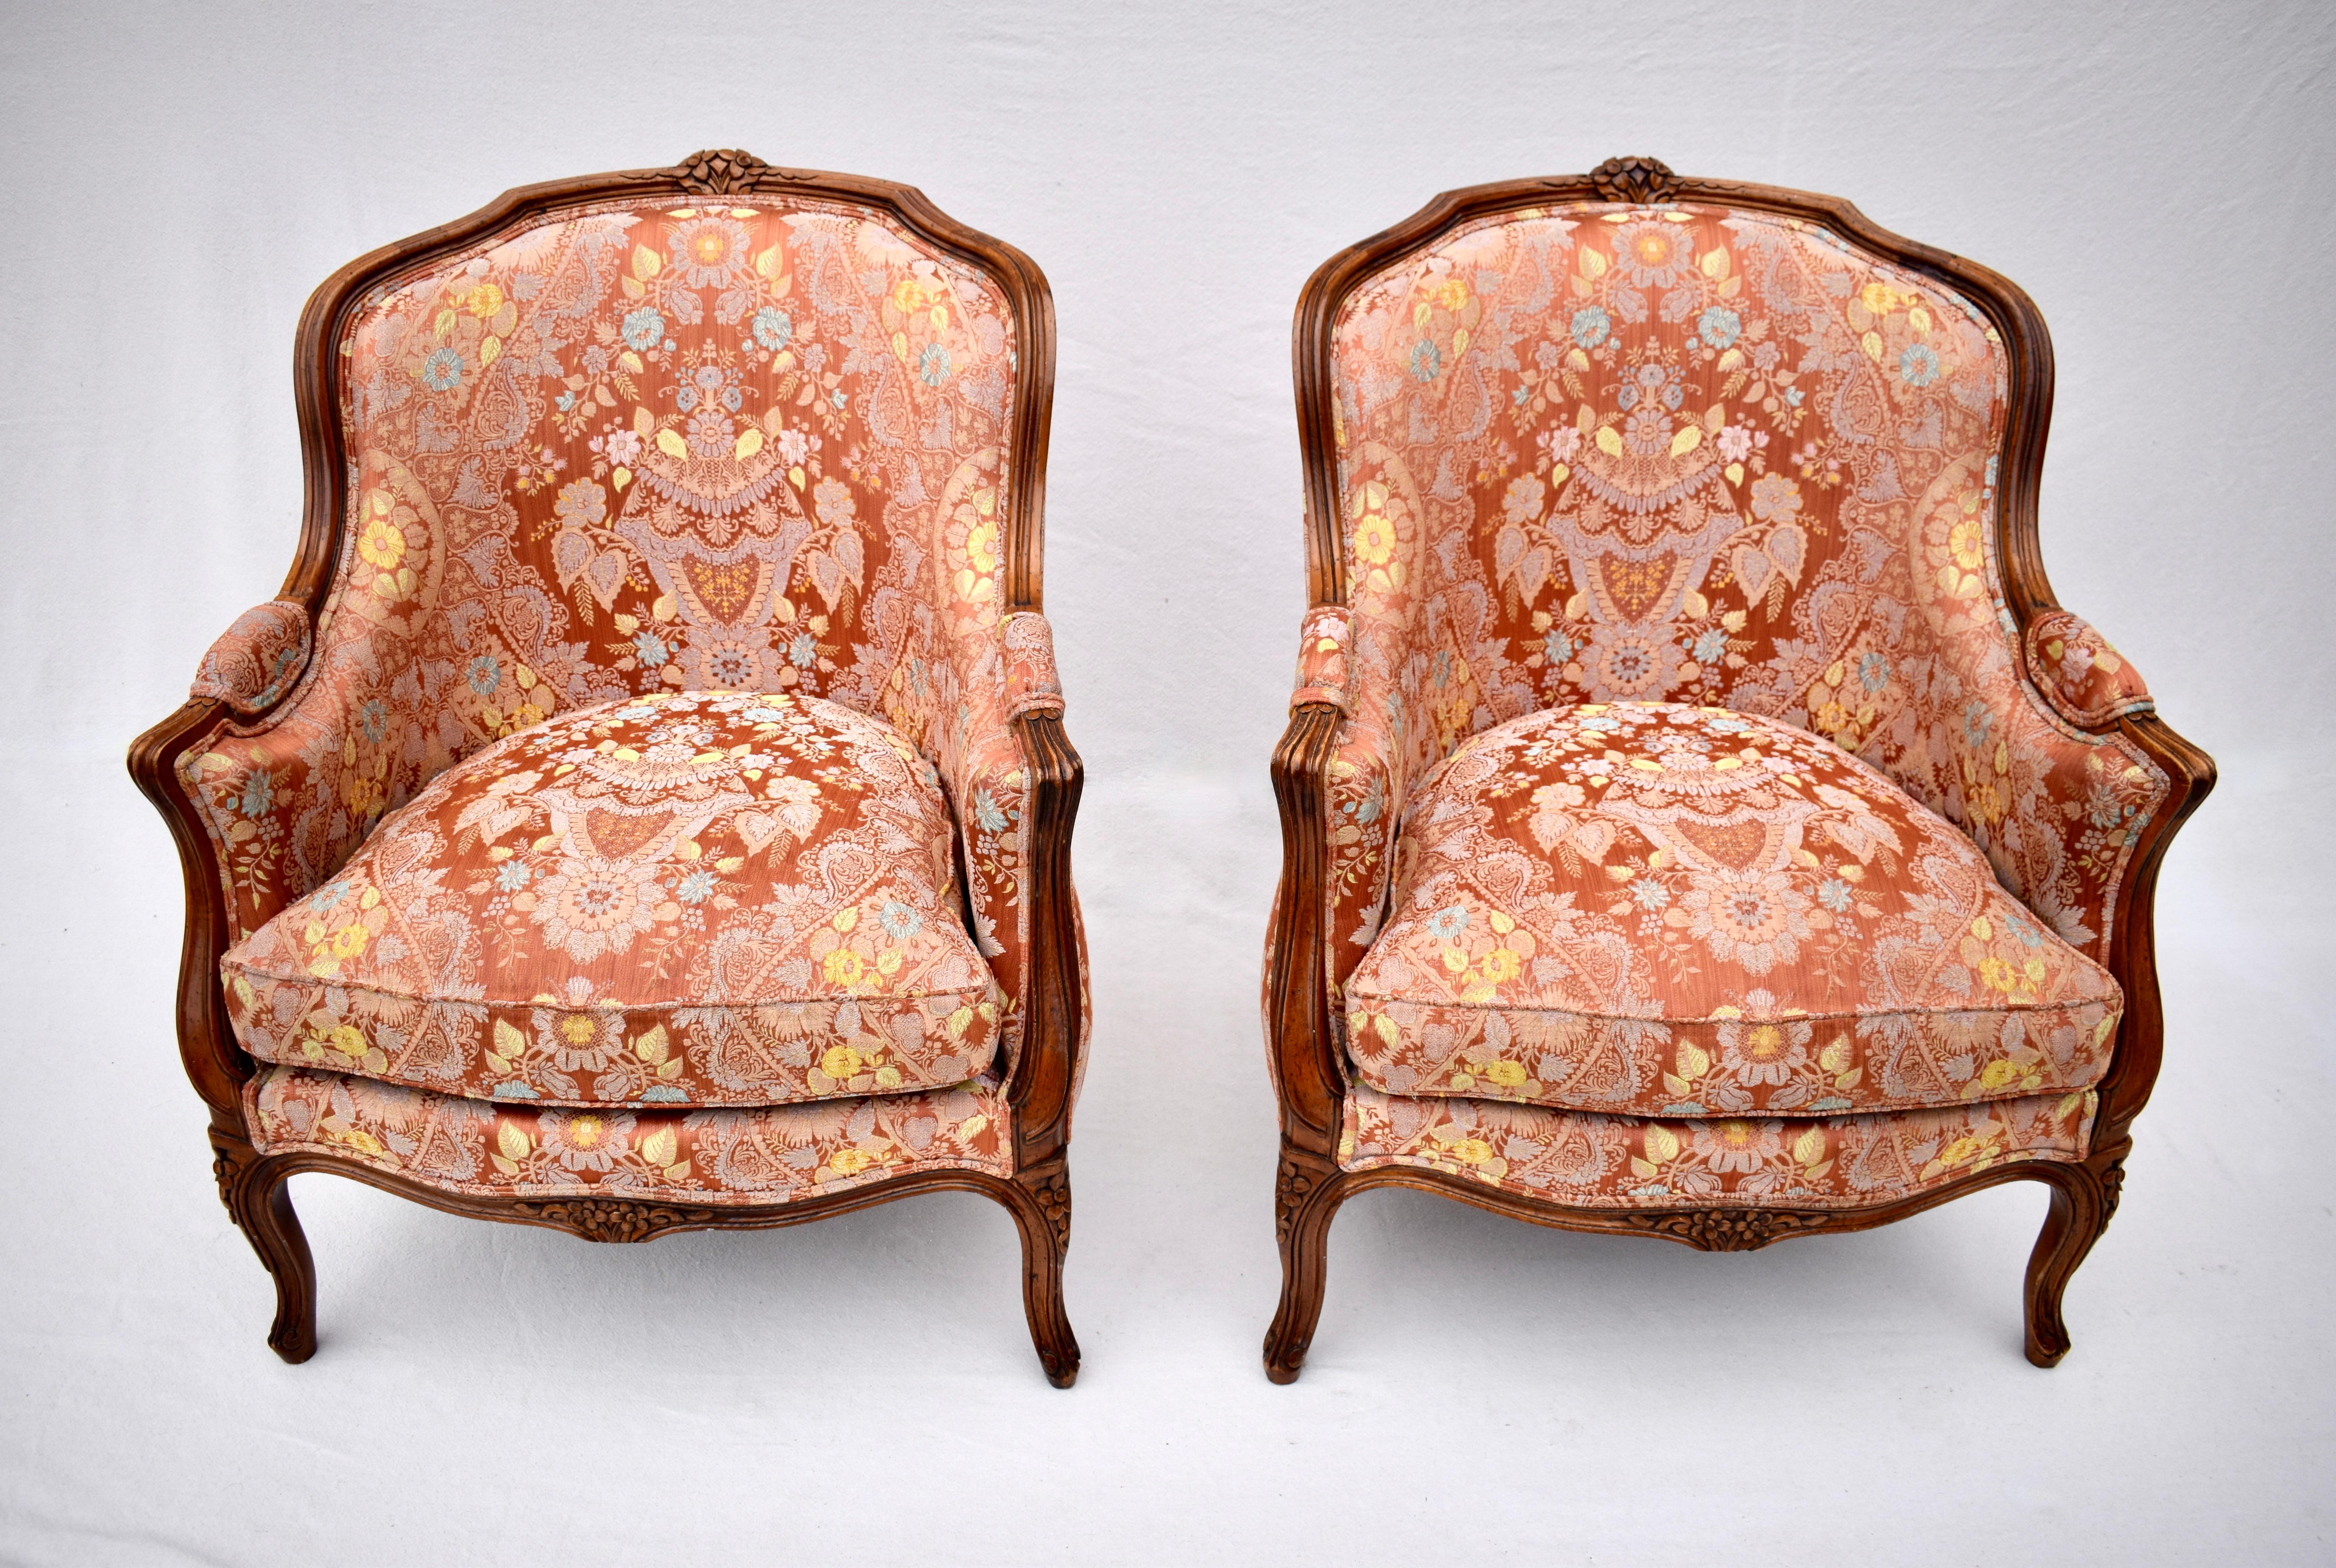 A pair of Louis XV style Bergere chairs of solid carved walnut refinished to their natural color. Reupholstered in the late 1990's in gorgeous multi Salmon Damask floral fabric with plush goose down cushions. Beautifully maintained in rarely used